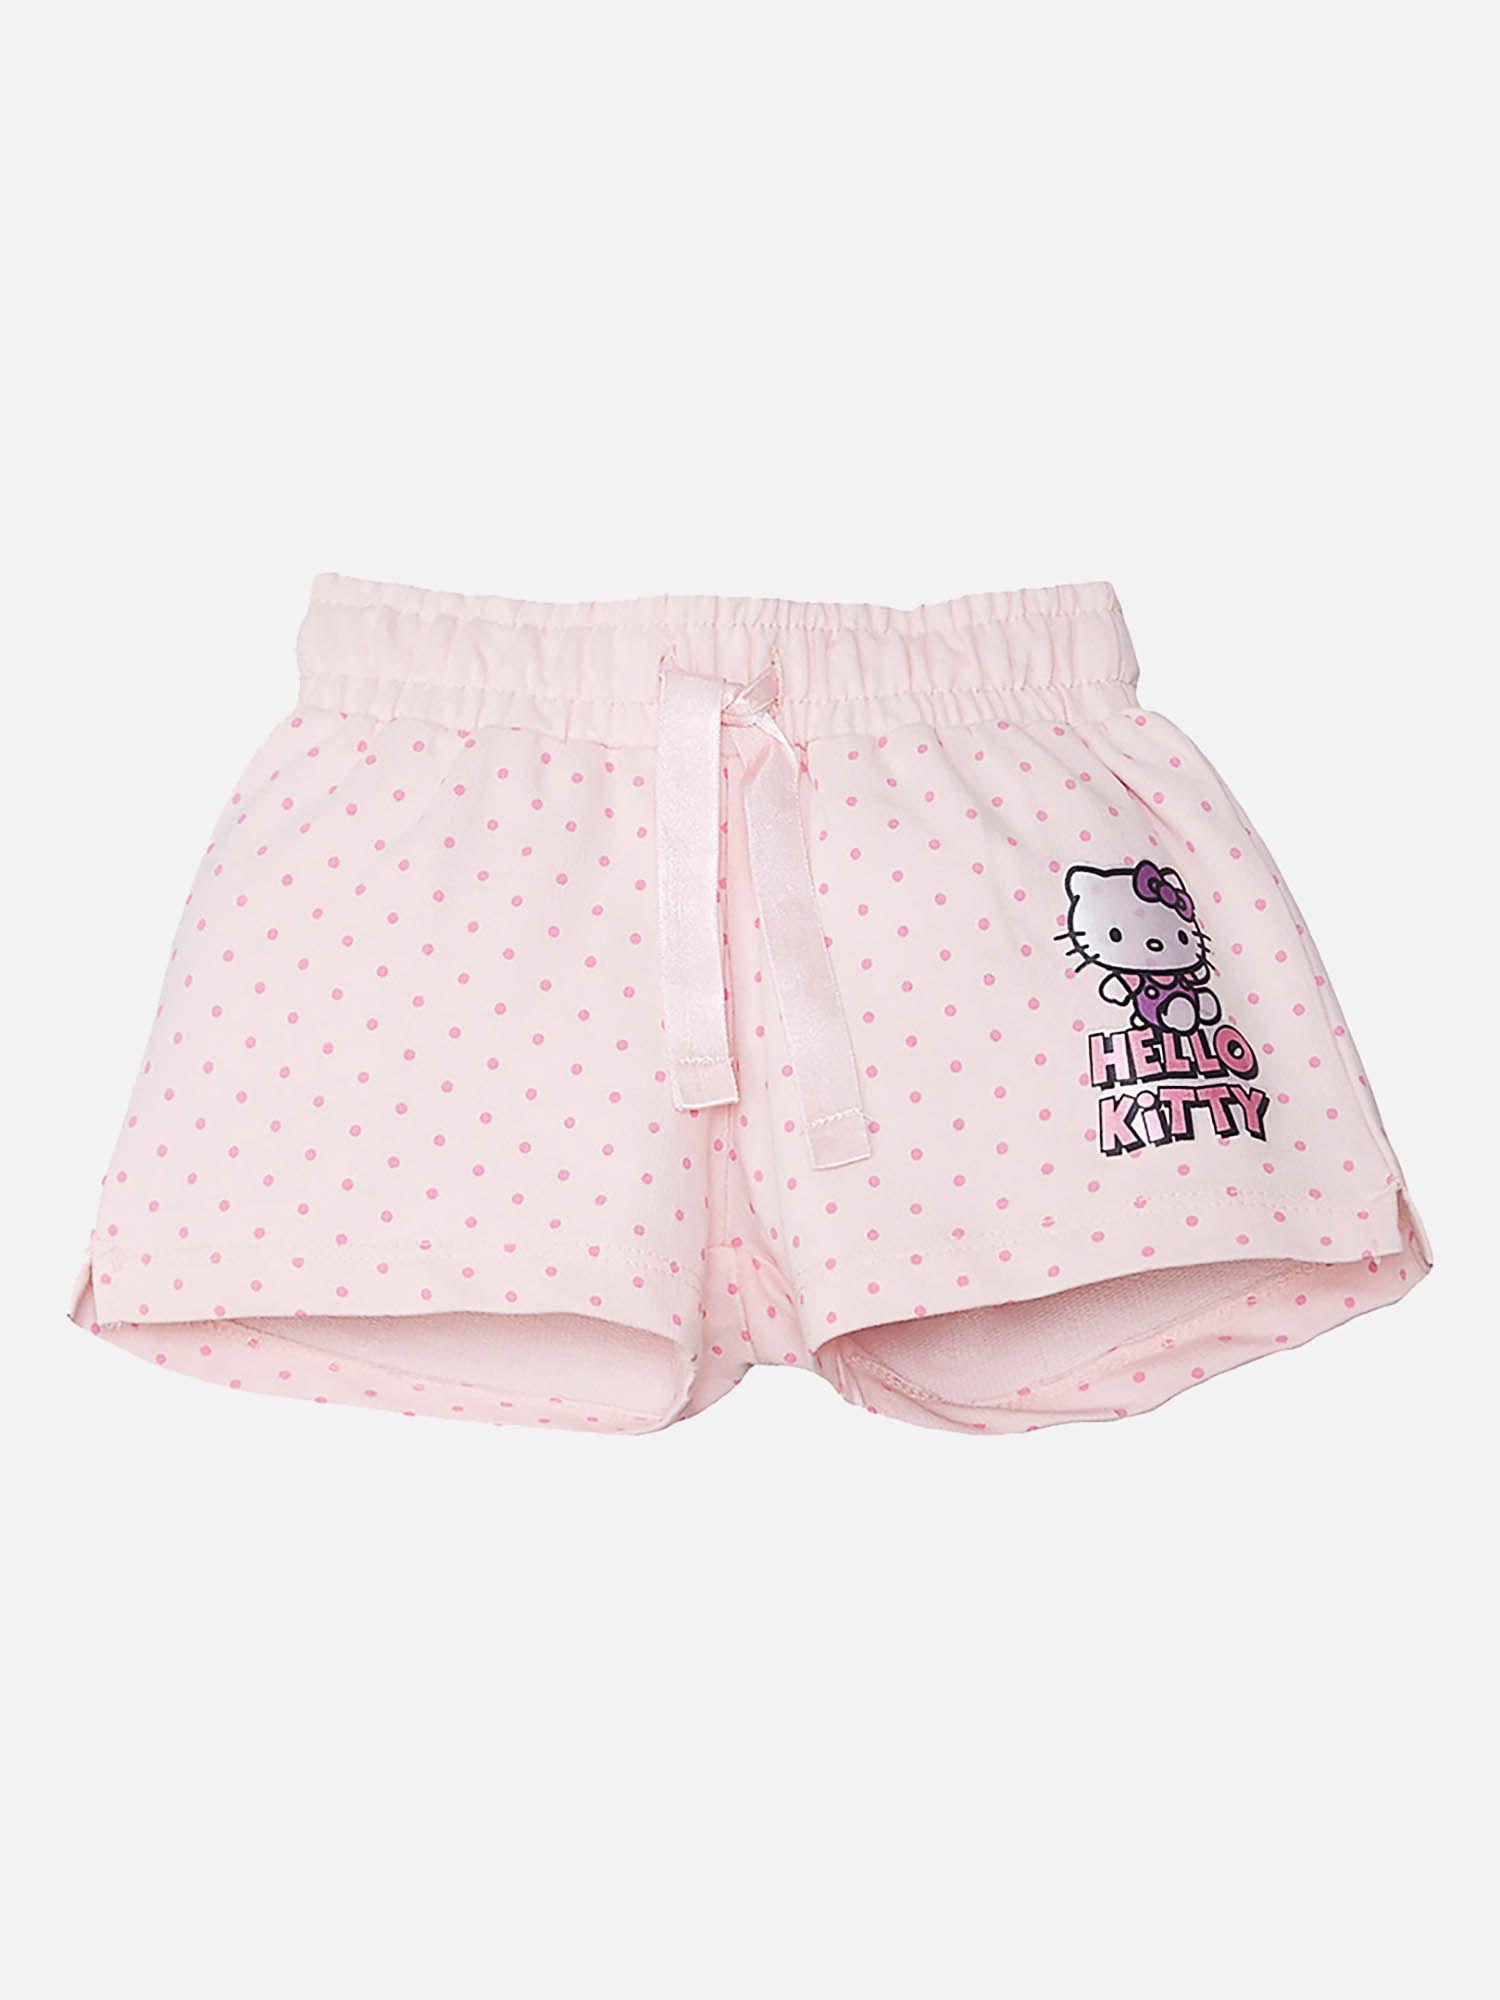 hello kitty featured pink shorts for girls